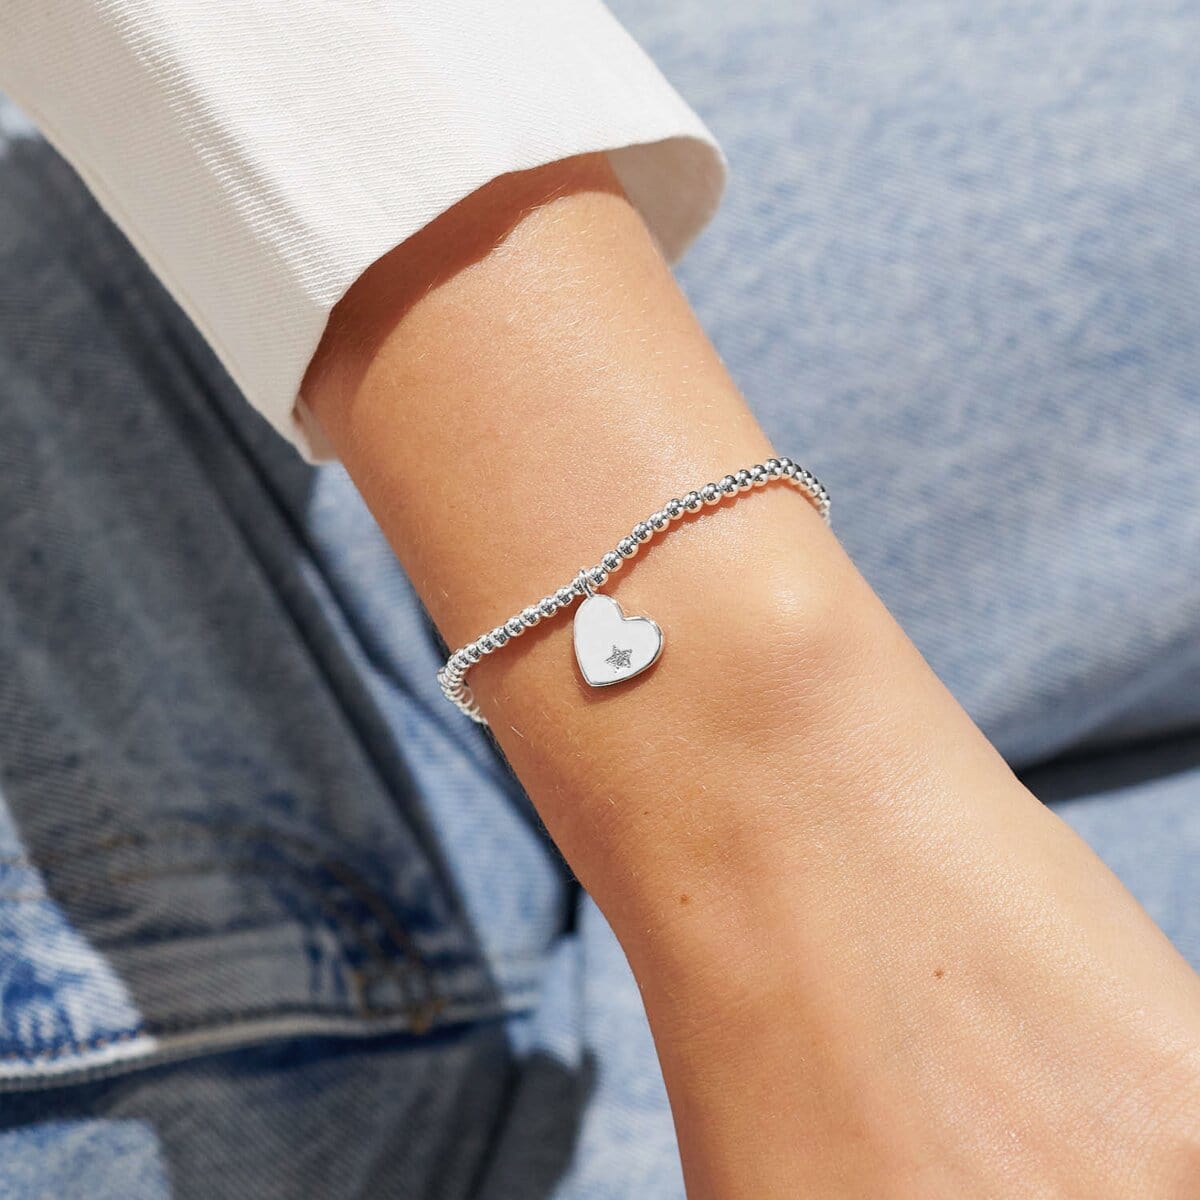 Joma Jewellery Bracelet Joma Jewellery Bracelet - A Little It's Your Year